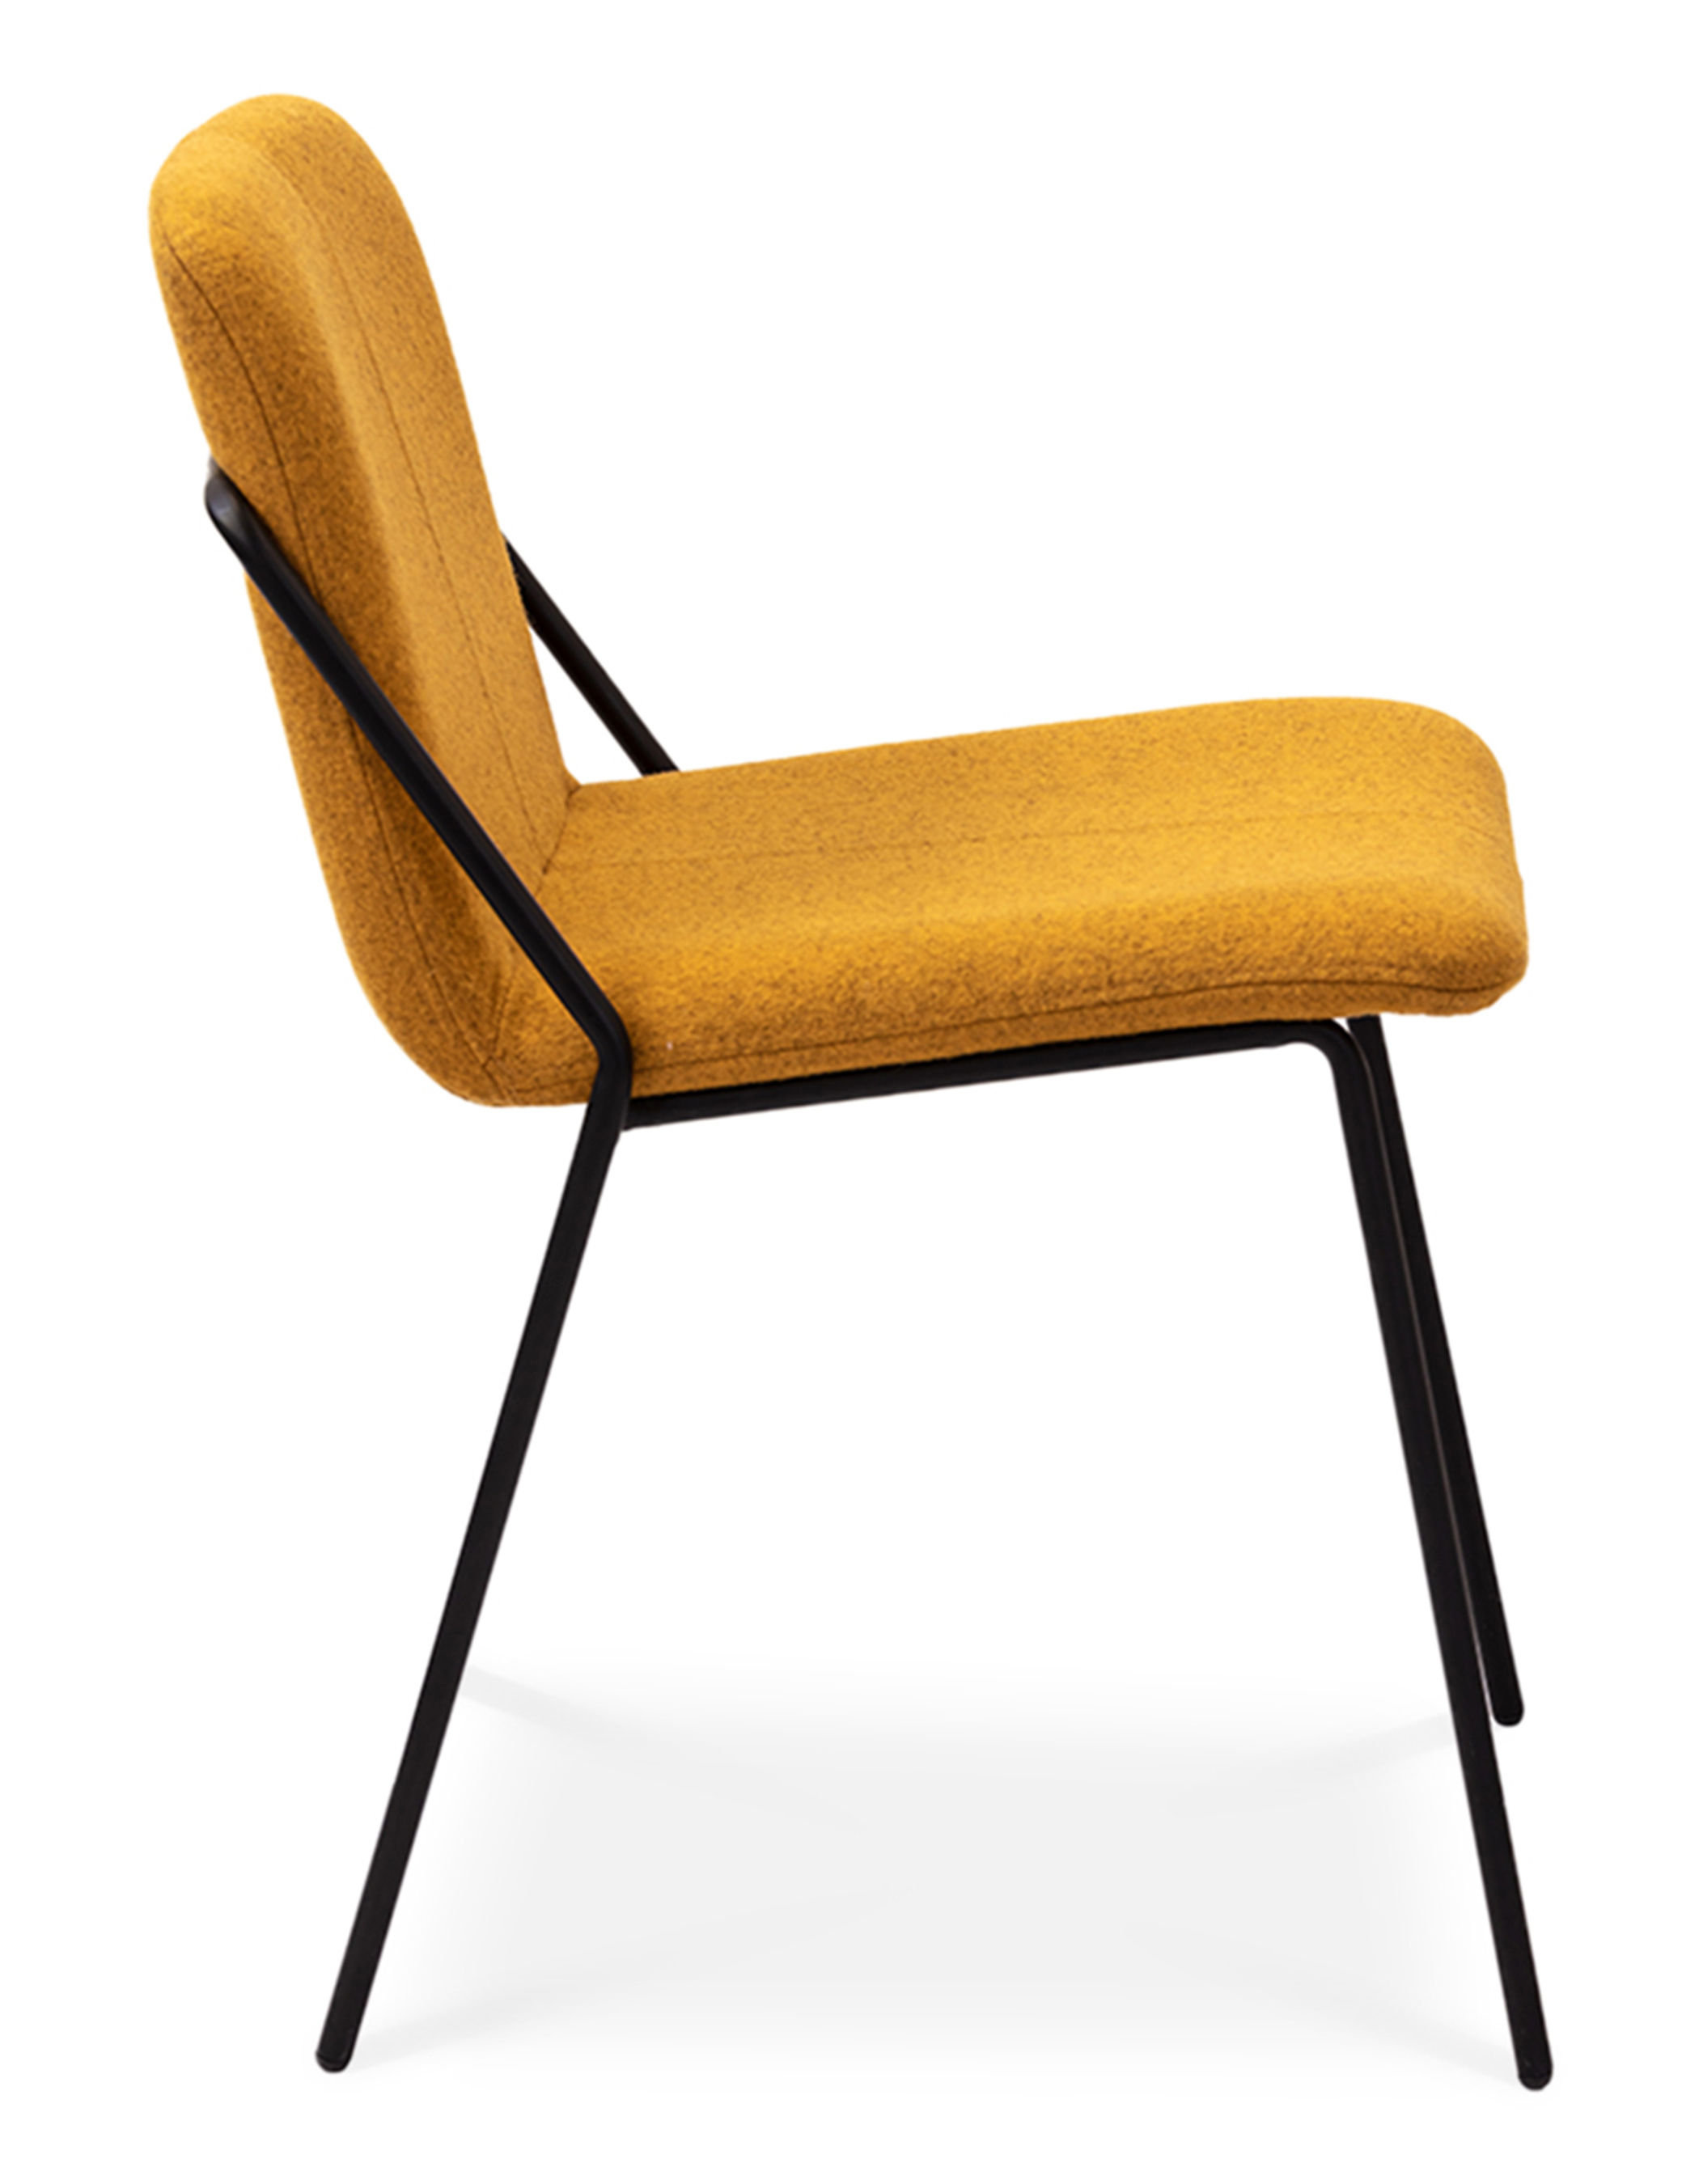 WS - Sling side chair - Upholstered yellow (Side)